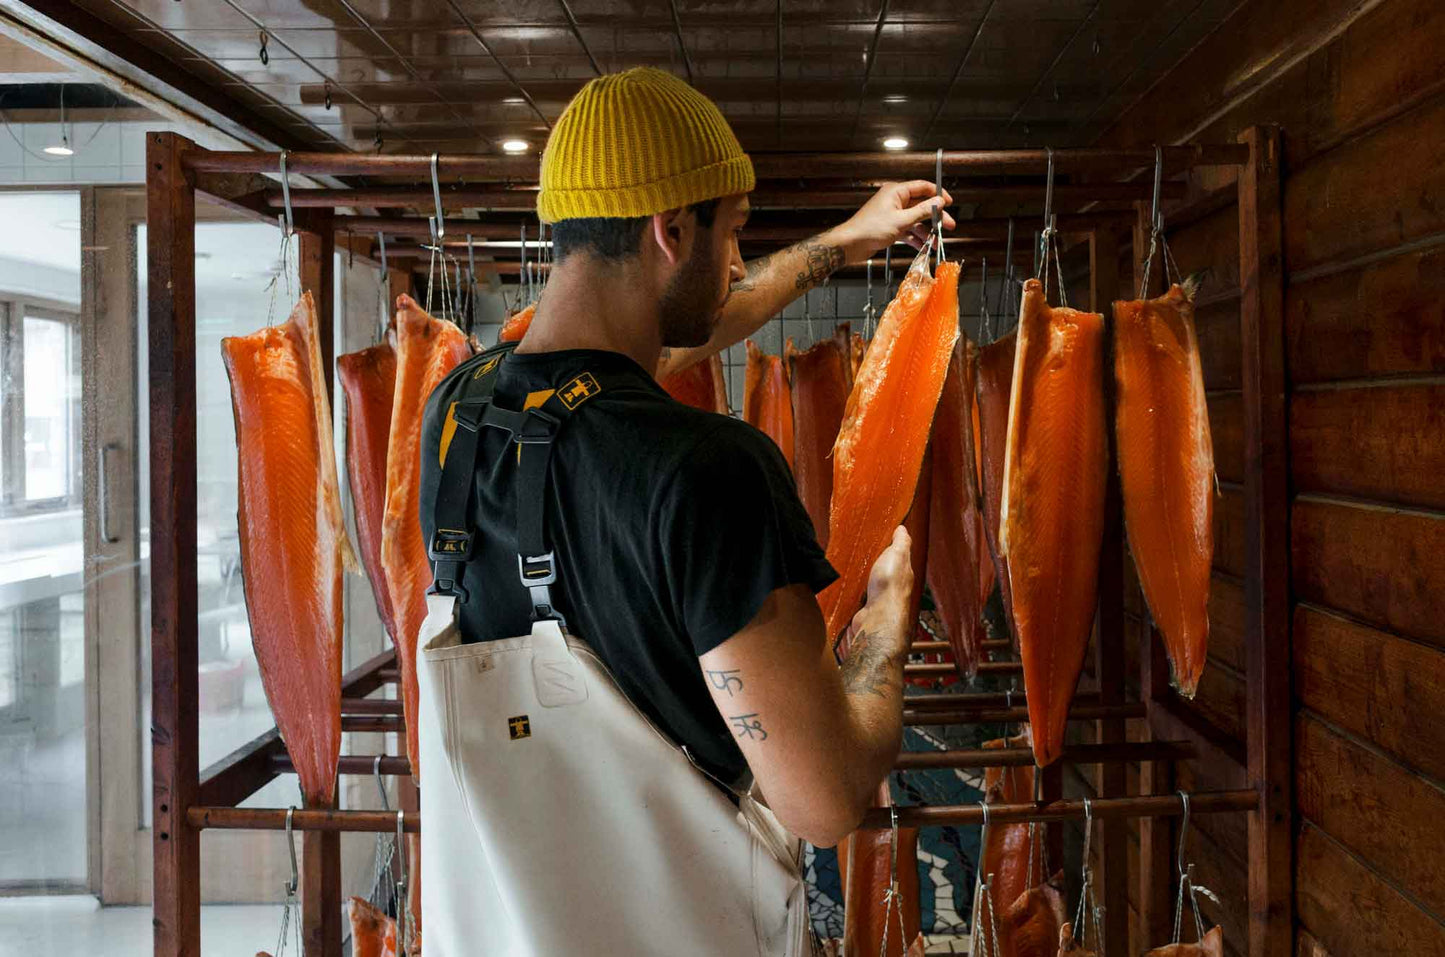 How Healthy is Smoked Salmon?